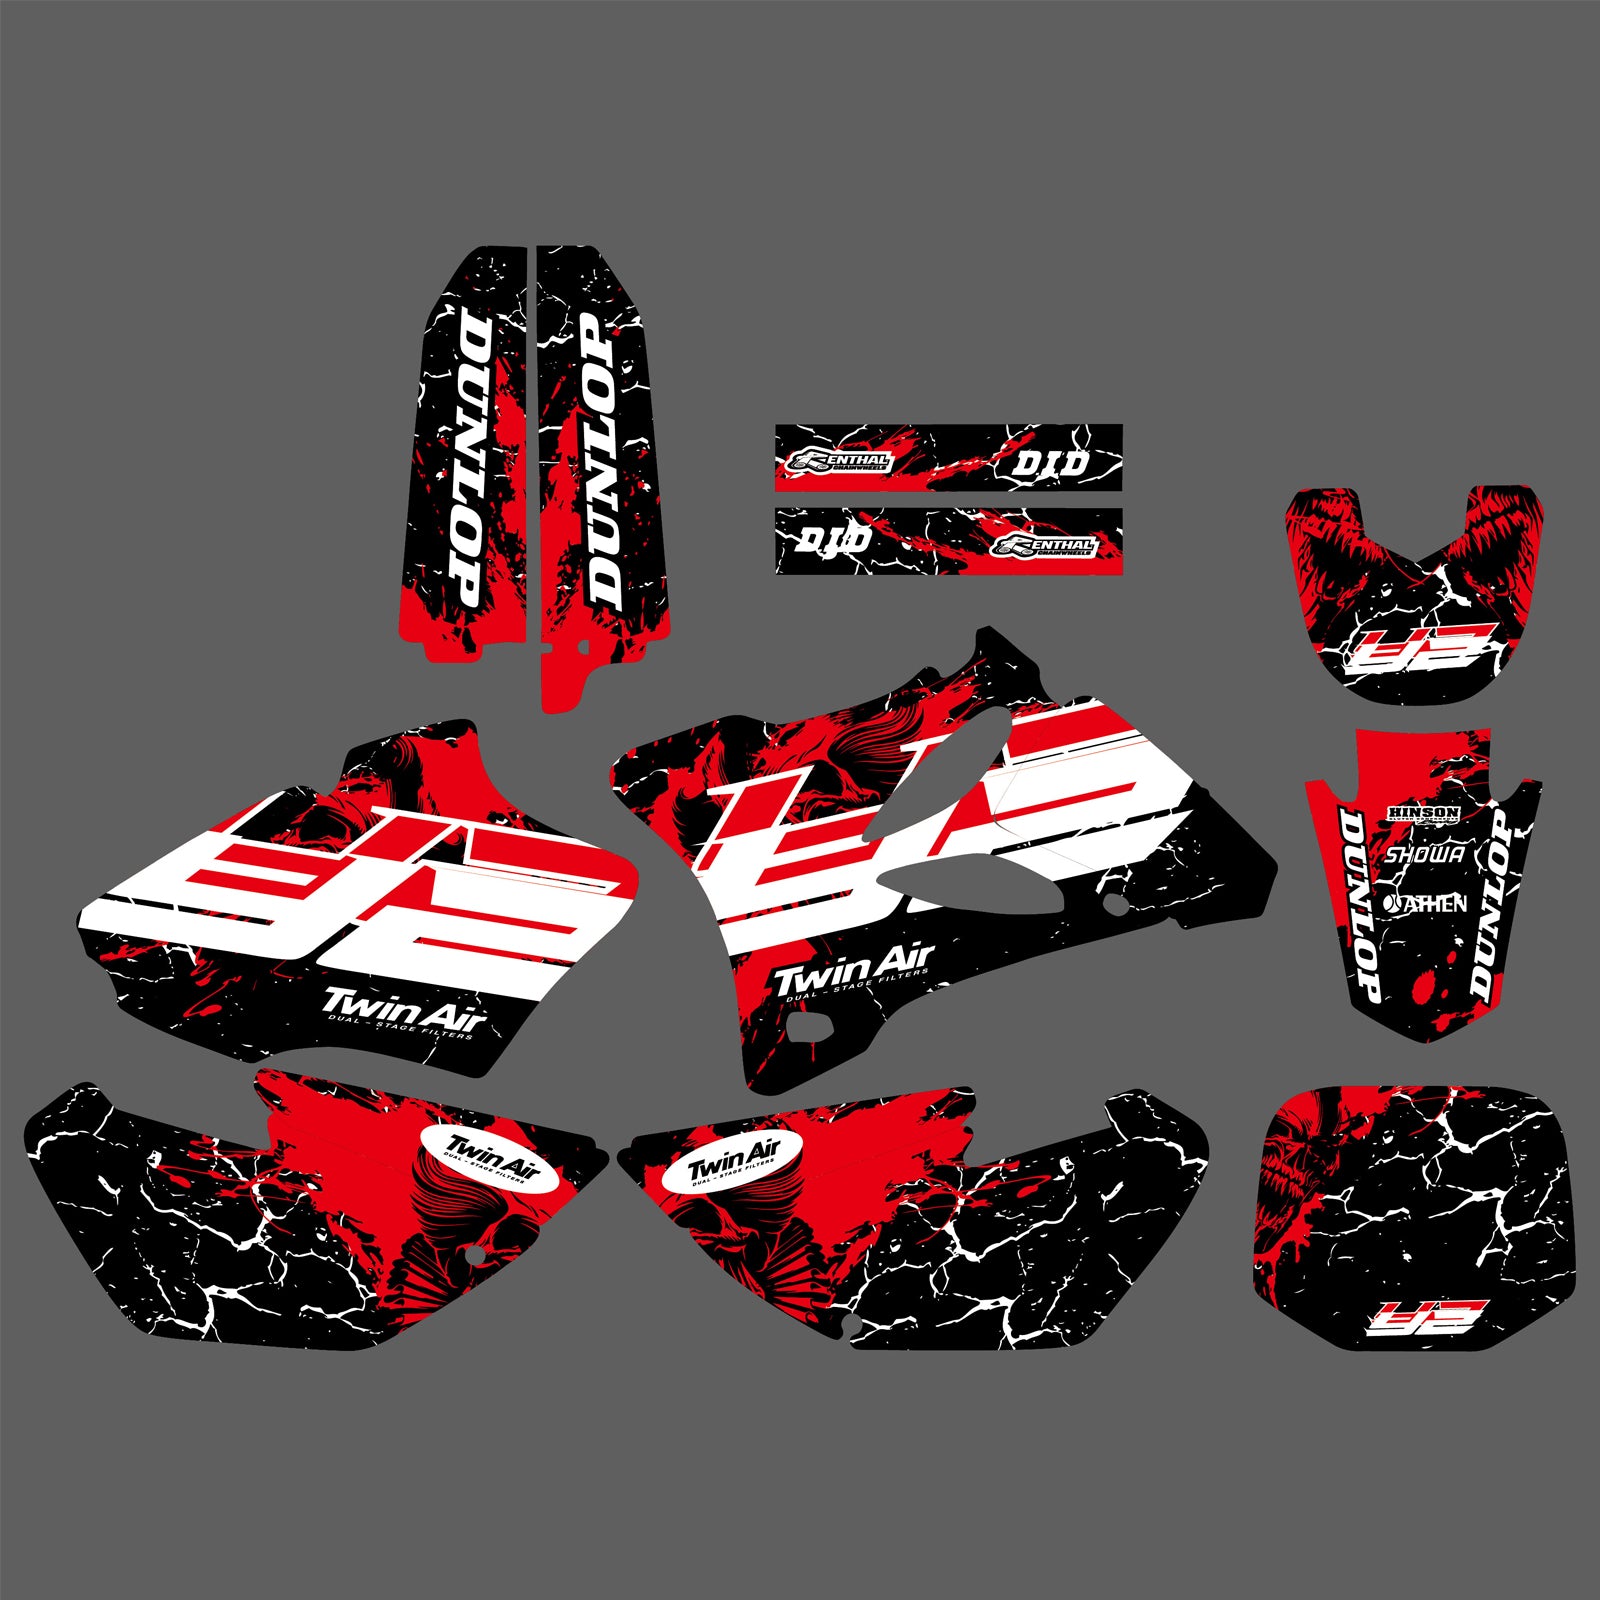 Team Graphics Decals Stickers Kit For Yamaha YZ85 2002-2014